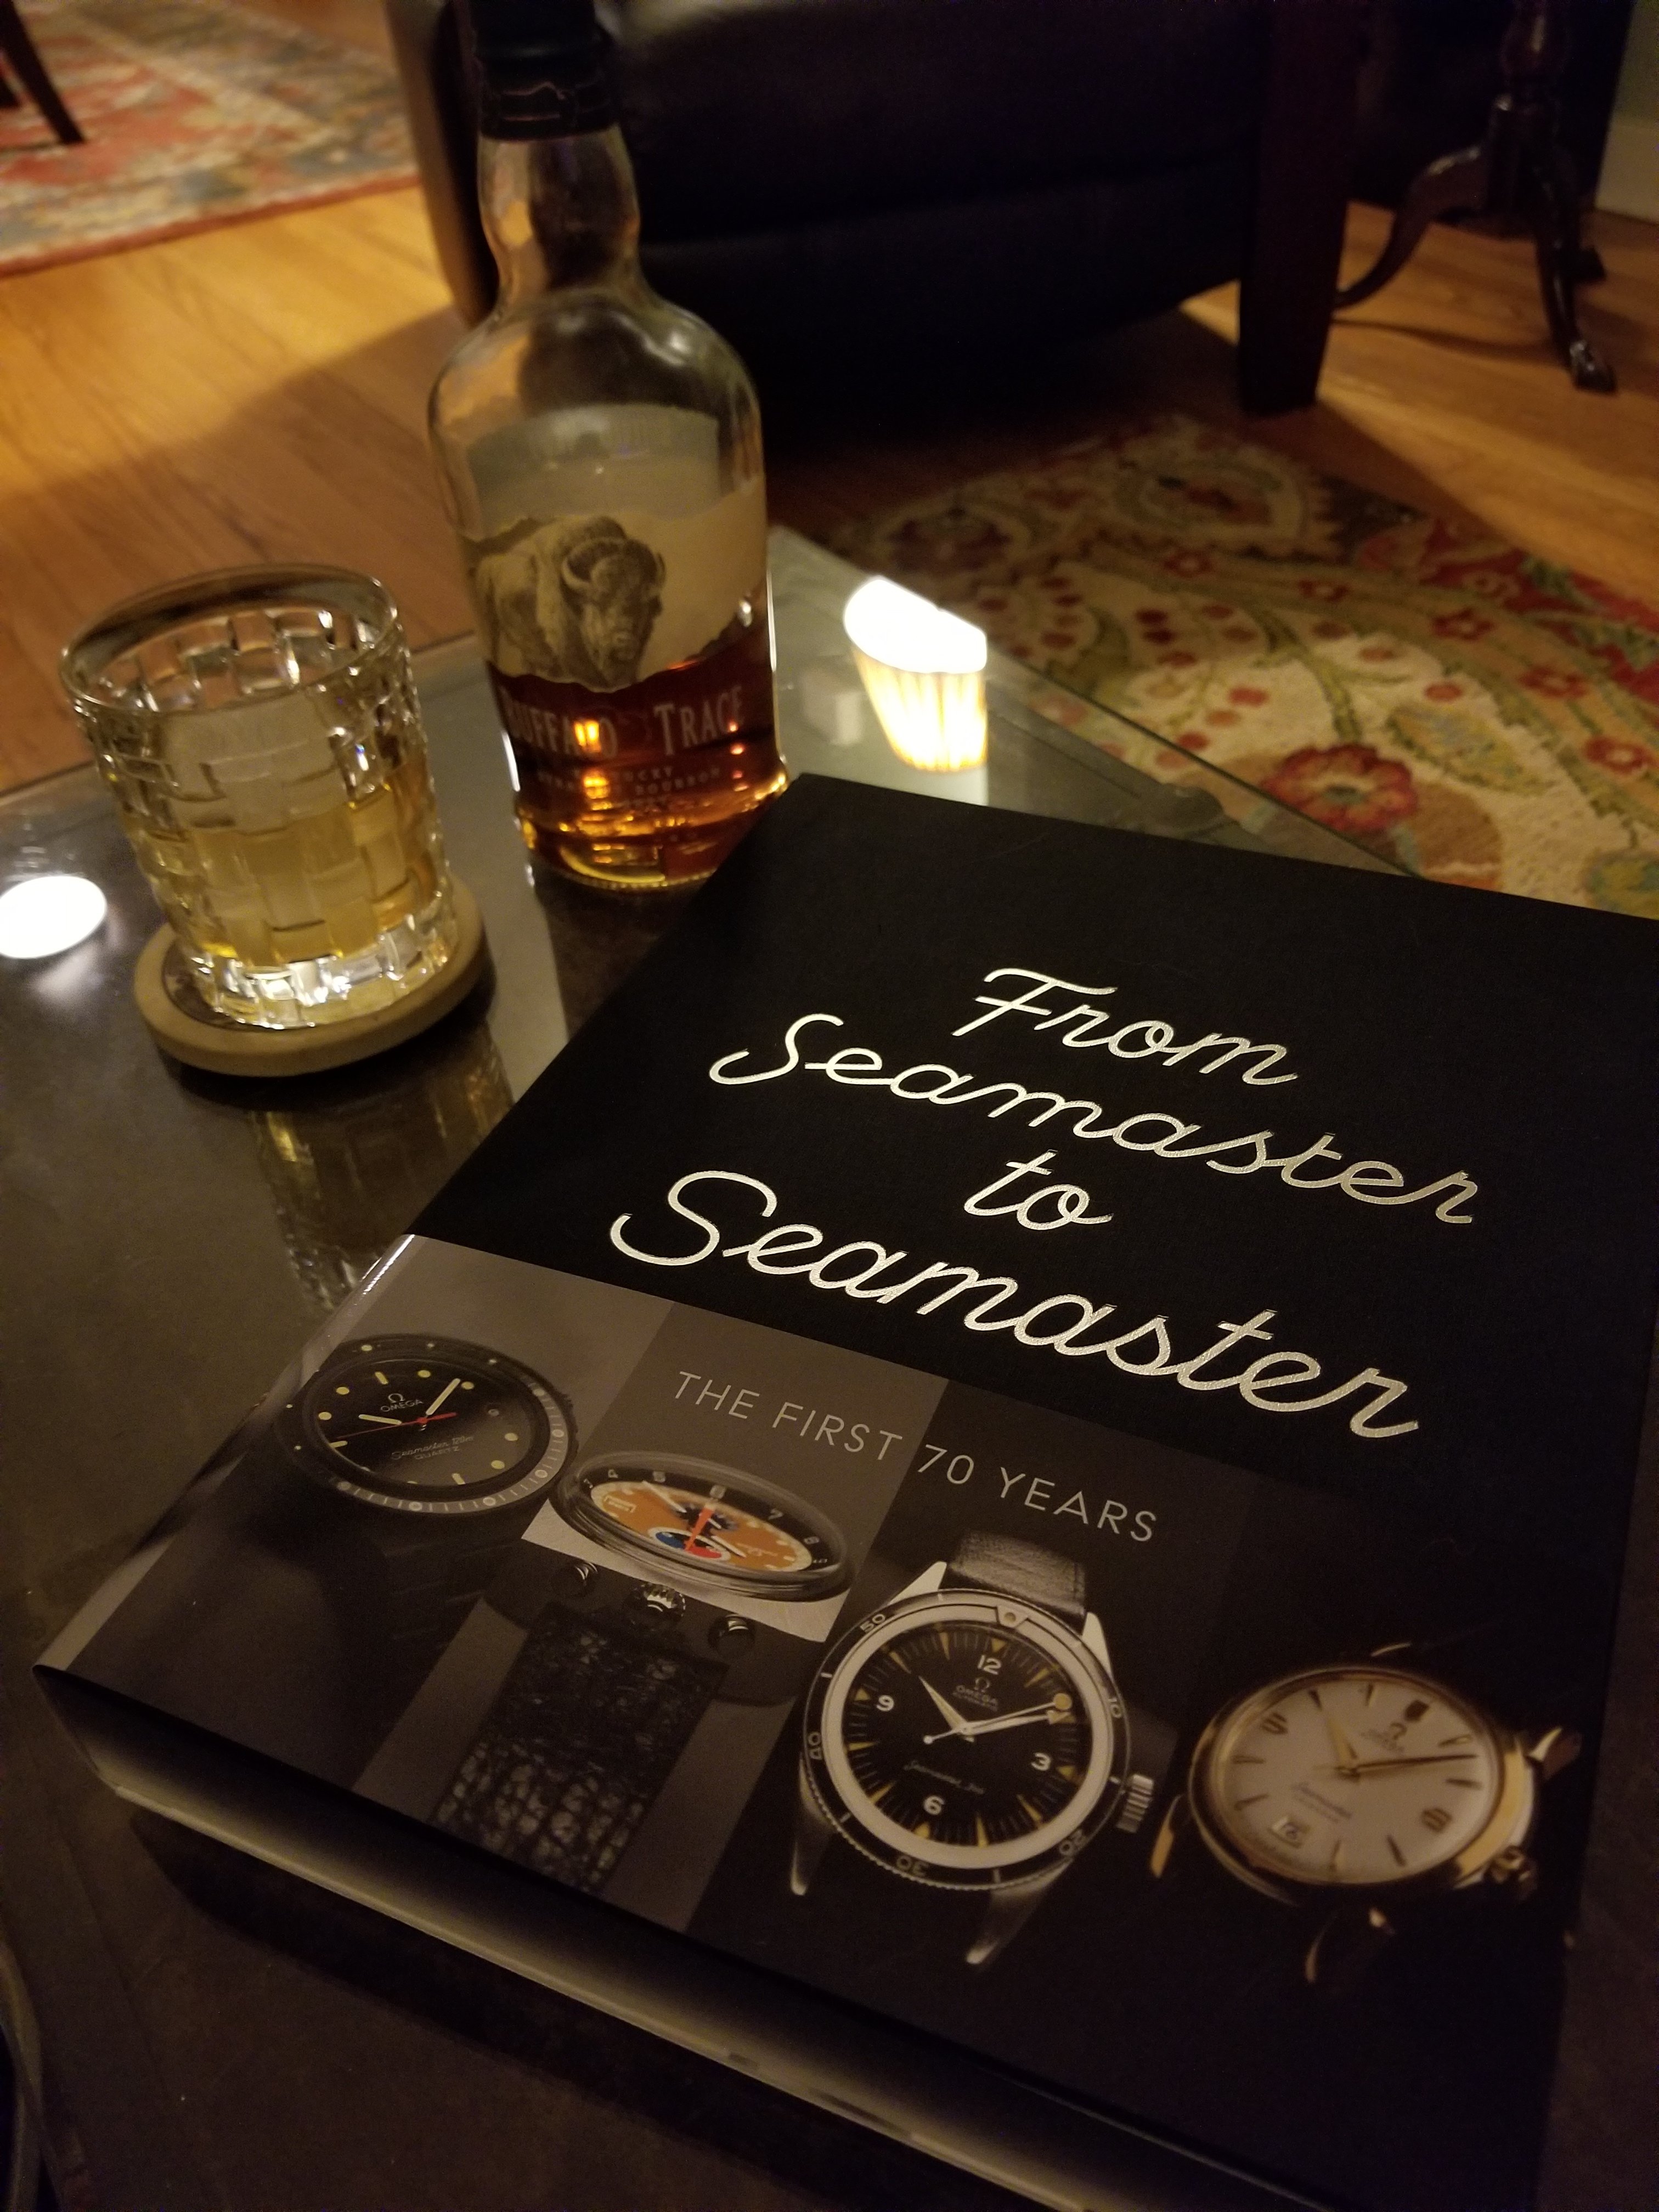 from seamaster to seamaster